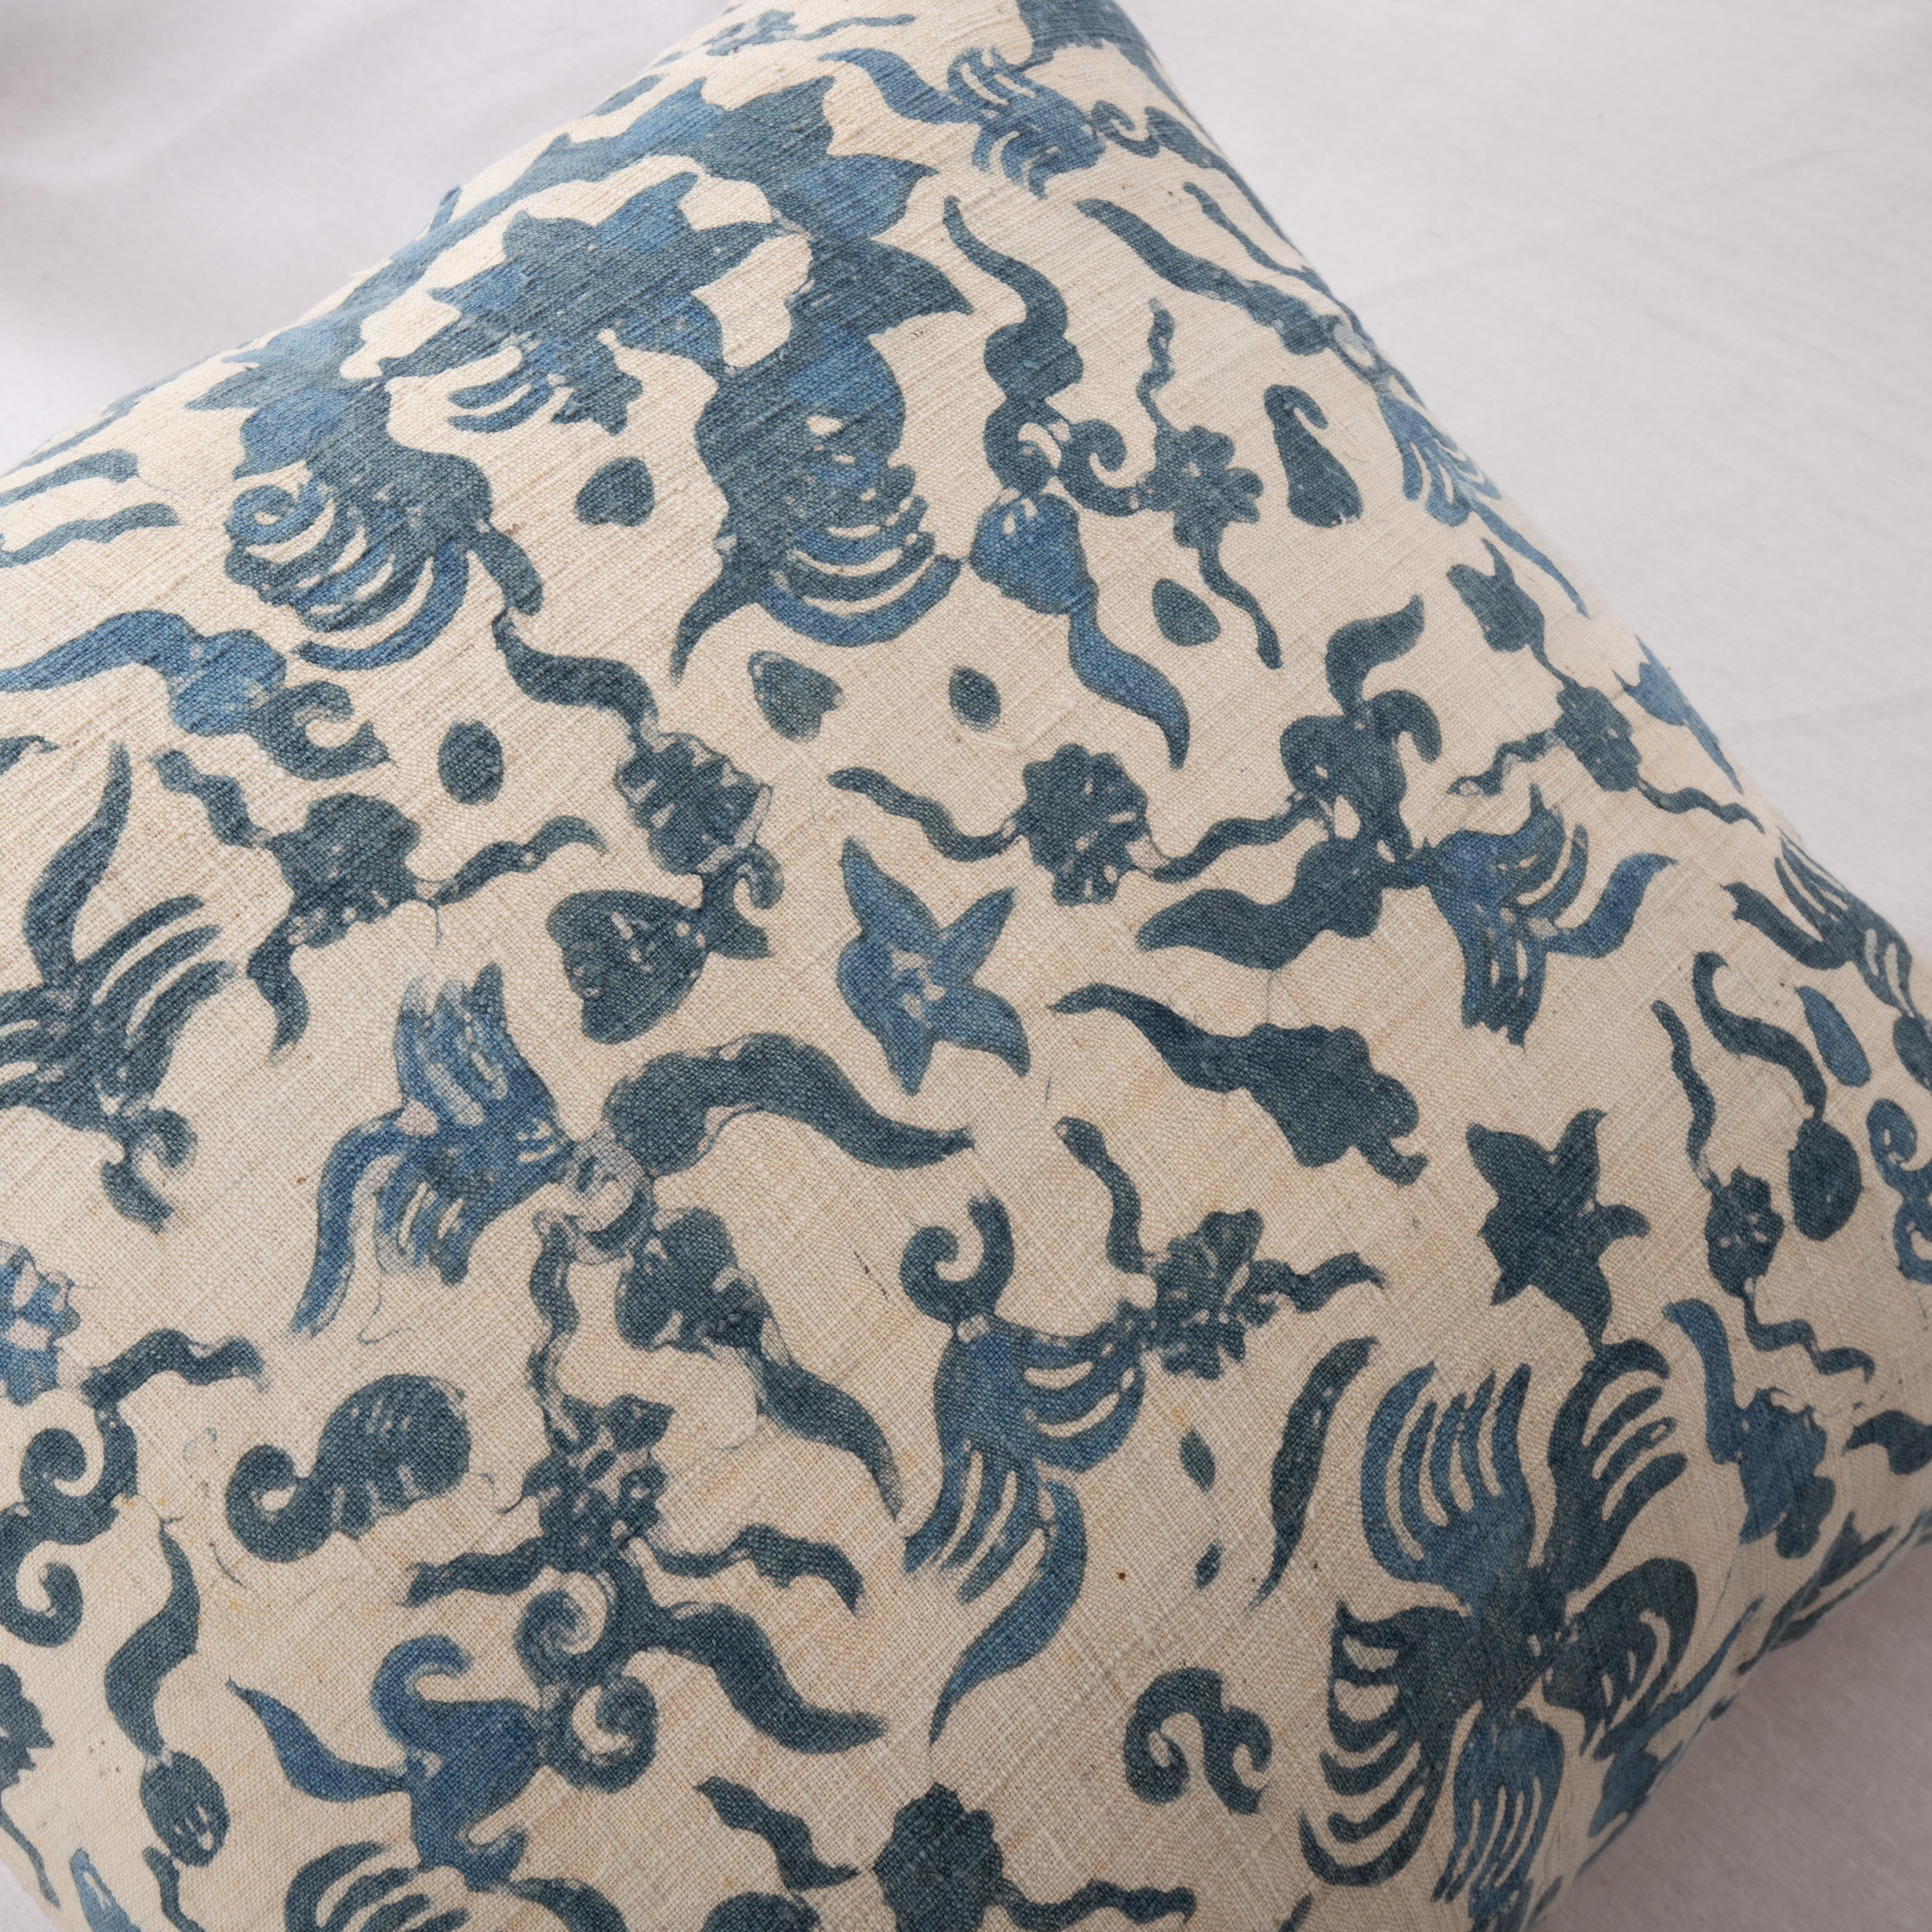 Vintage Cotton Batik Pillow Cover, 1970s/80s In Good Condition For Sale In Istanbul, TR